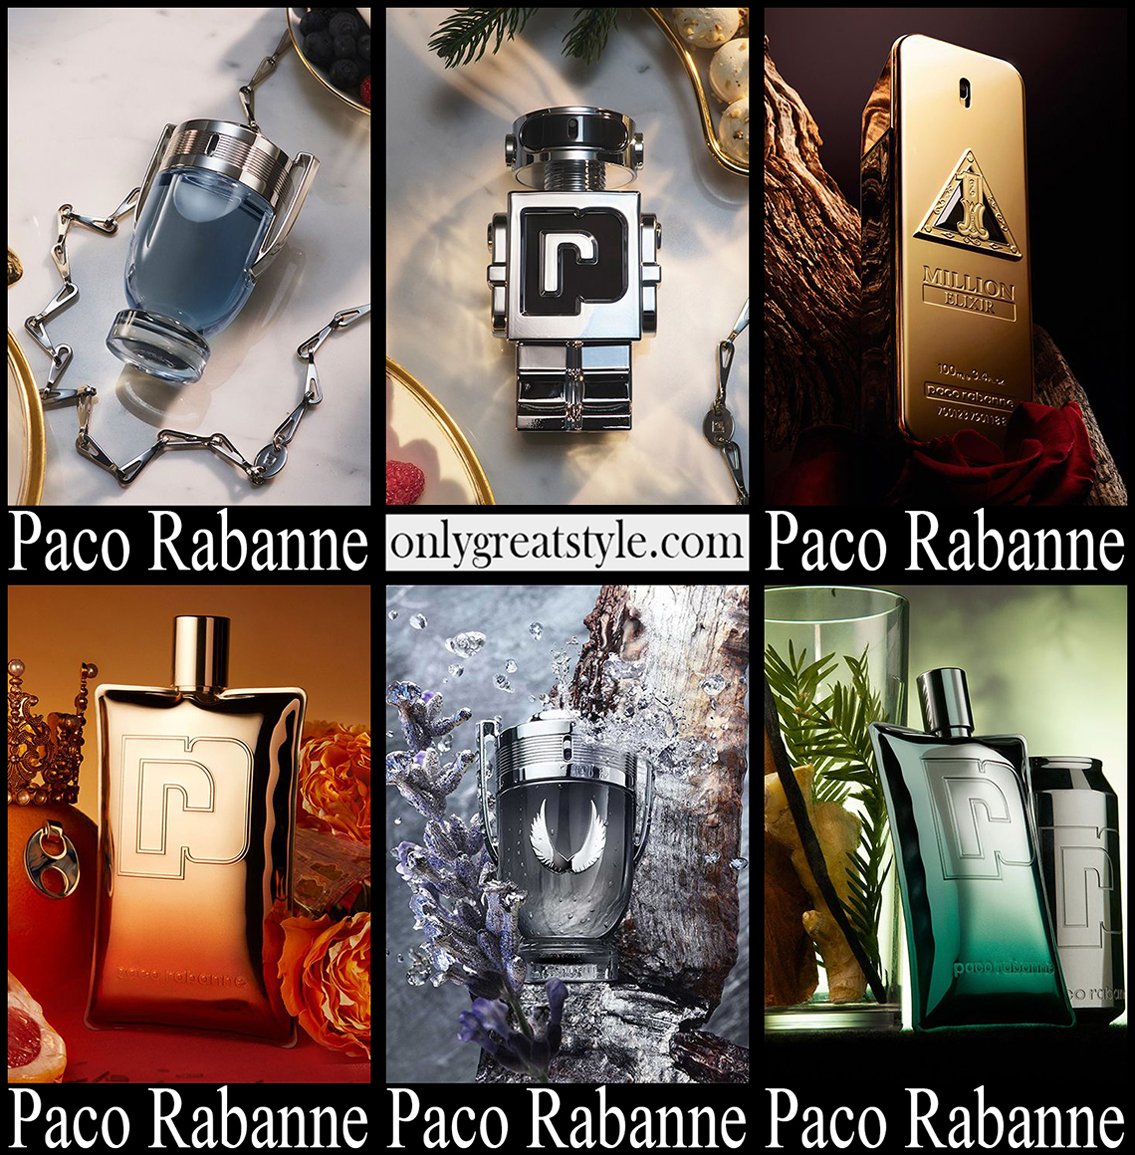 Paco Rabanne perfumes 2023 new arrivals gift ideas for men